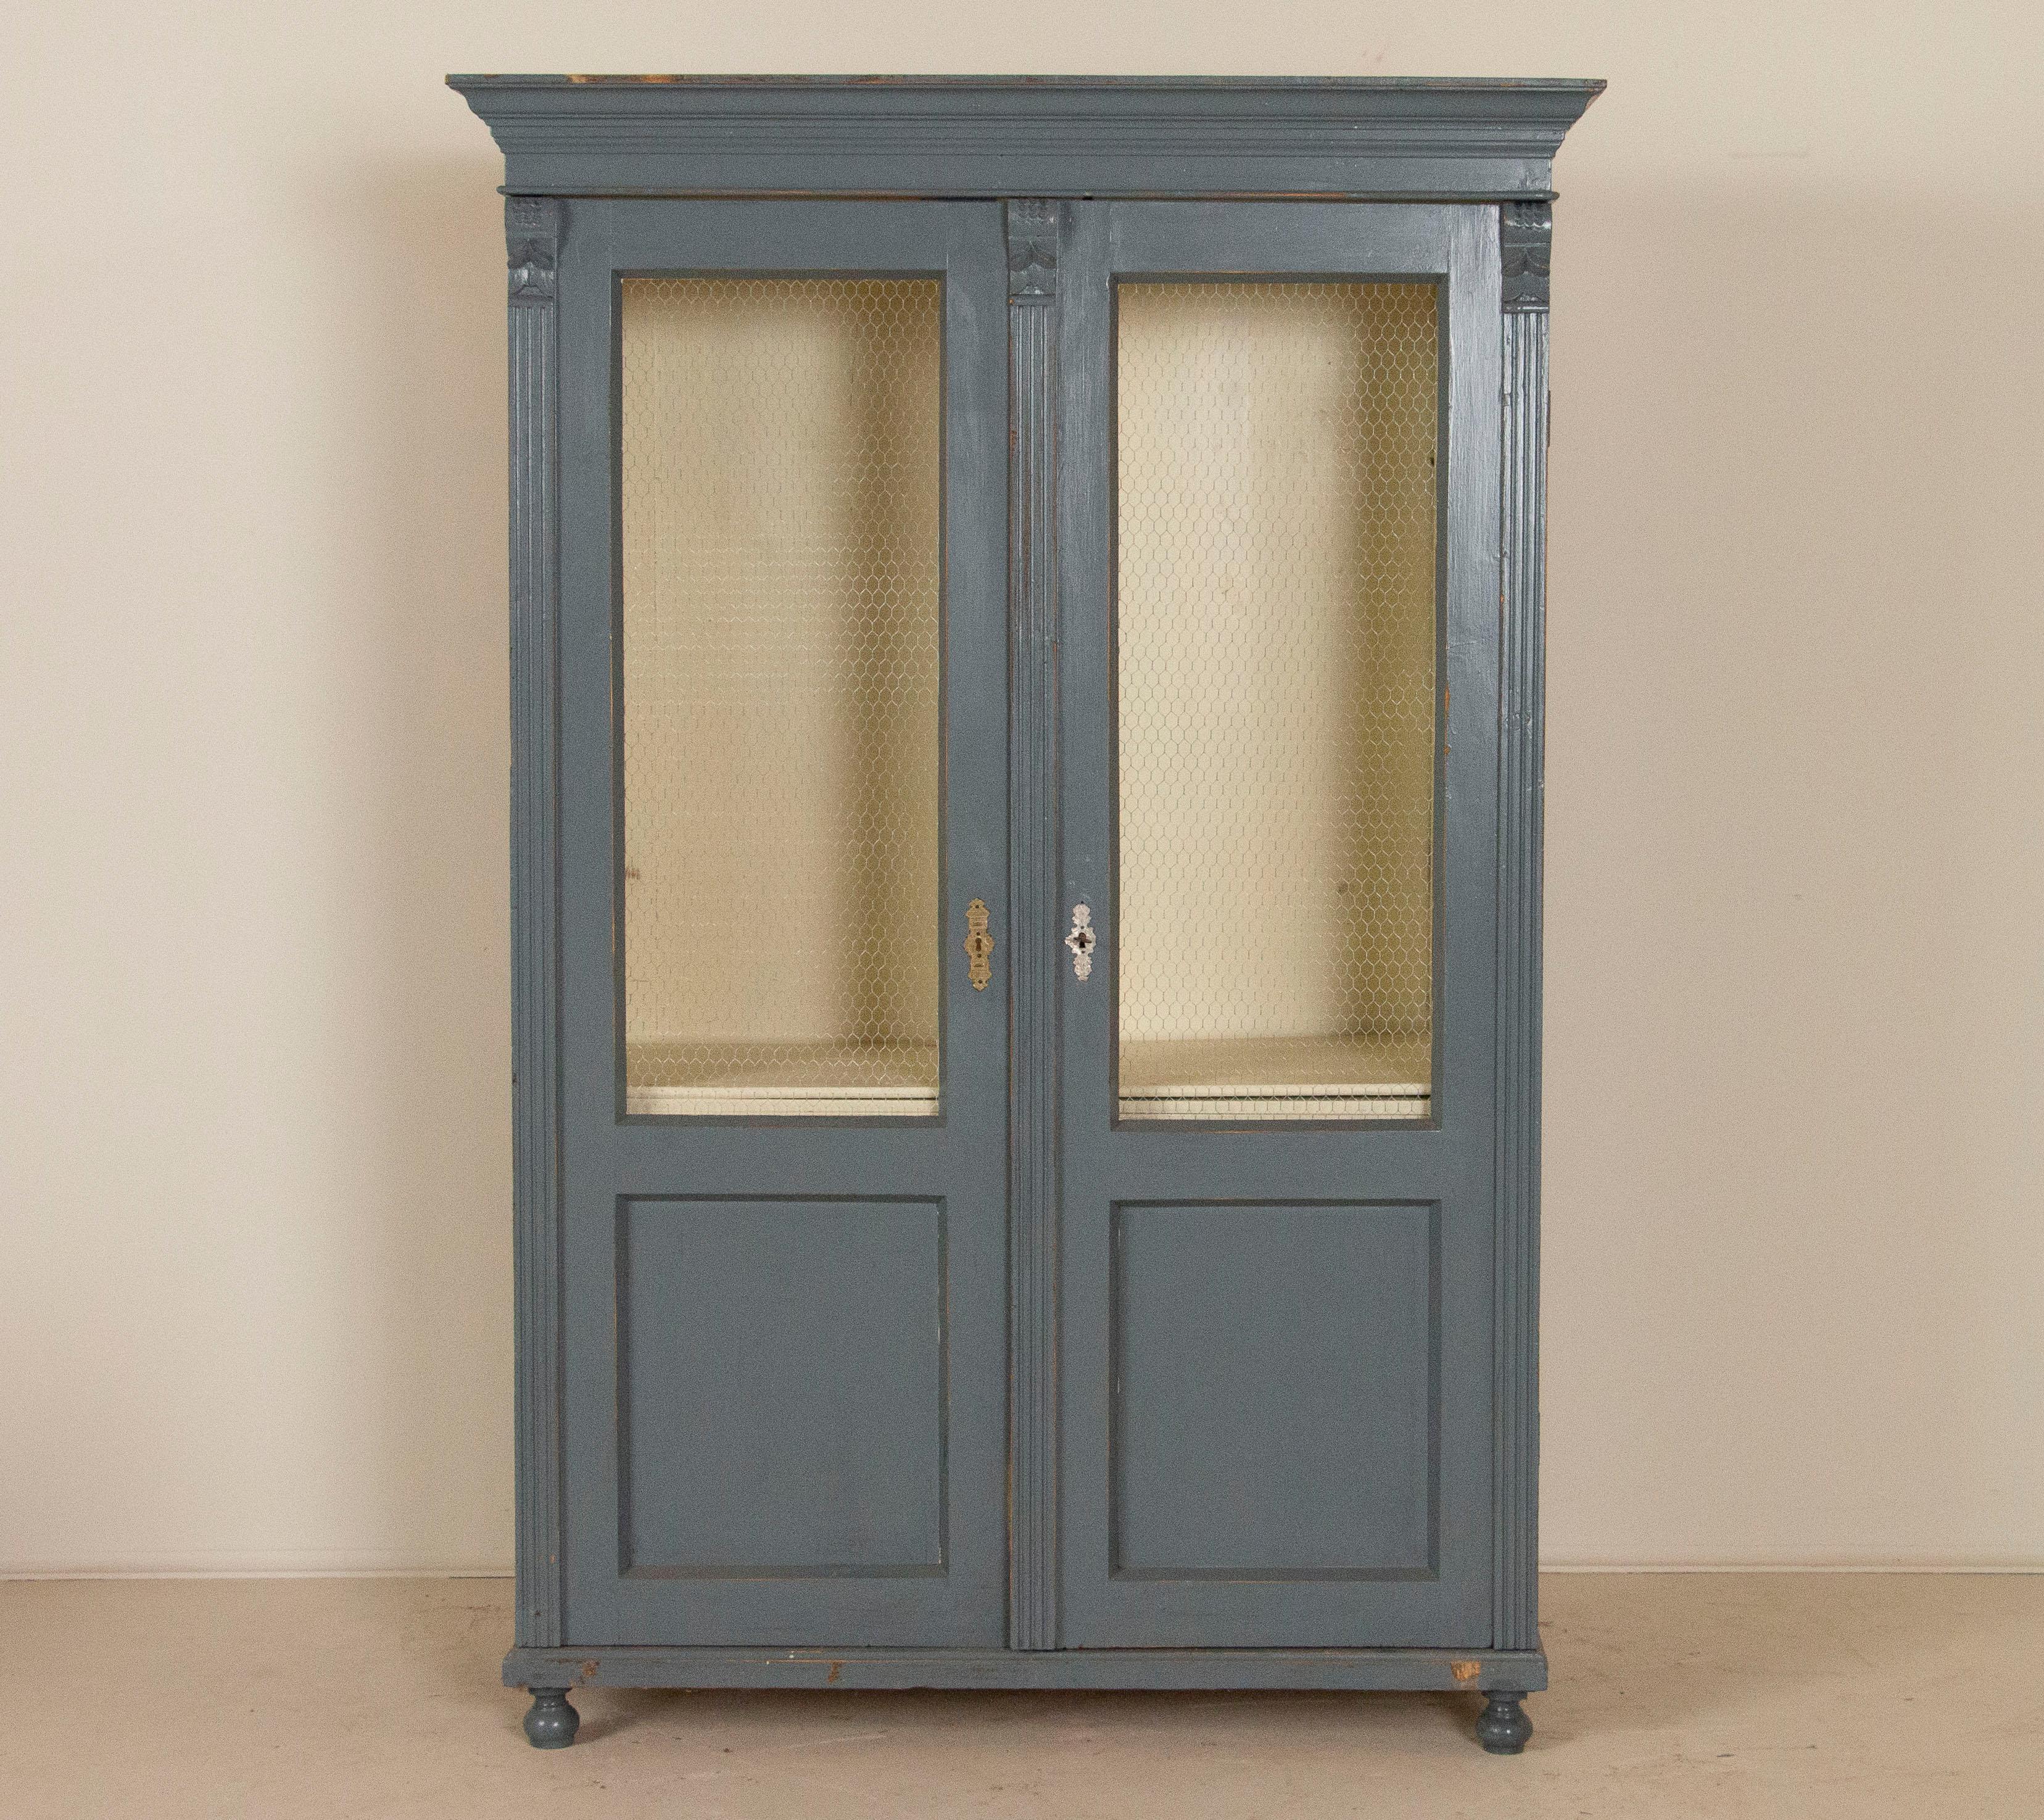 This antique blue painted Swedish 2-door bookcase has had the glass replaced with wire mesh giving the bookcase a more open and accessible feel. Where the deep grayish blue paint has been scraped there are hints of natural pine showing through